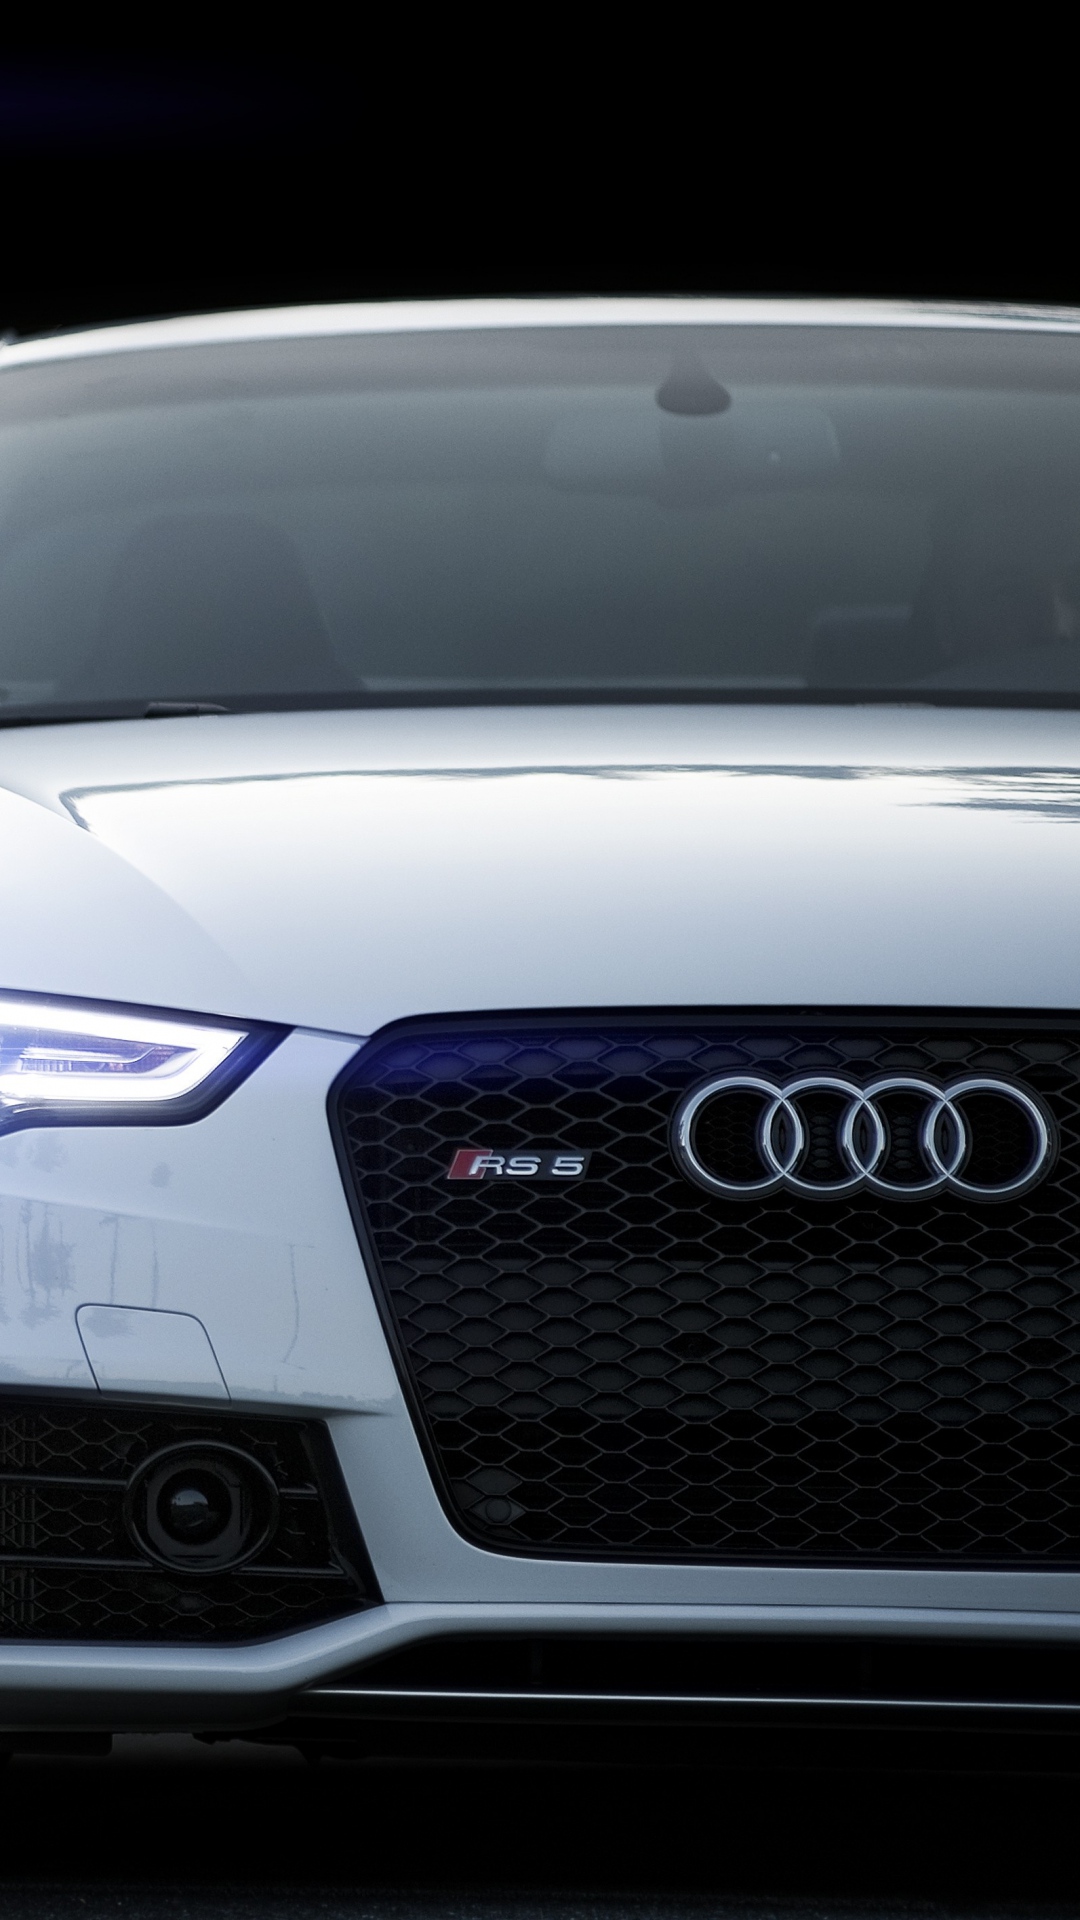 Free Download Audi Iphone Background